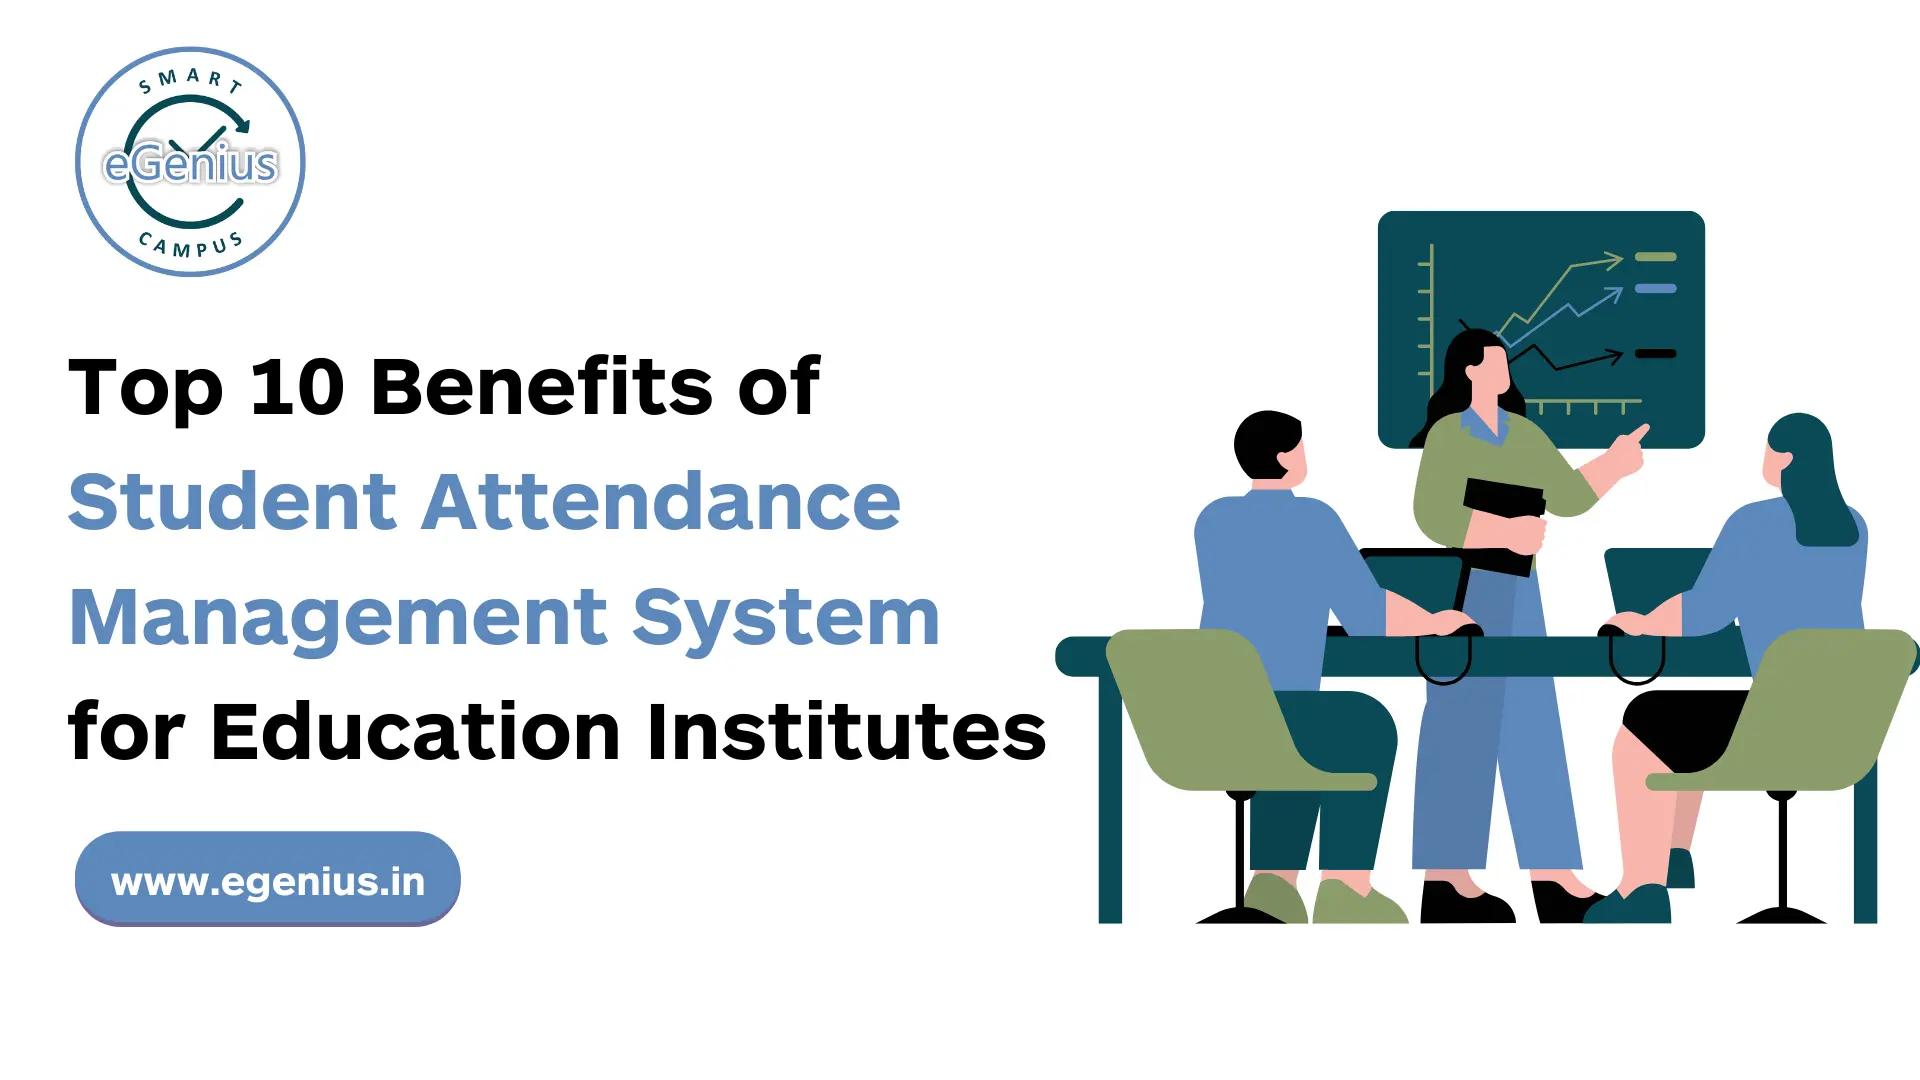 Top 10 Benefits of Student Attendance Management System for Education Institutes